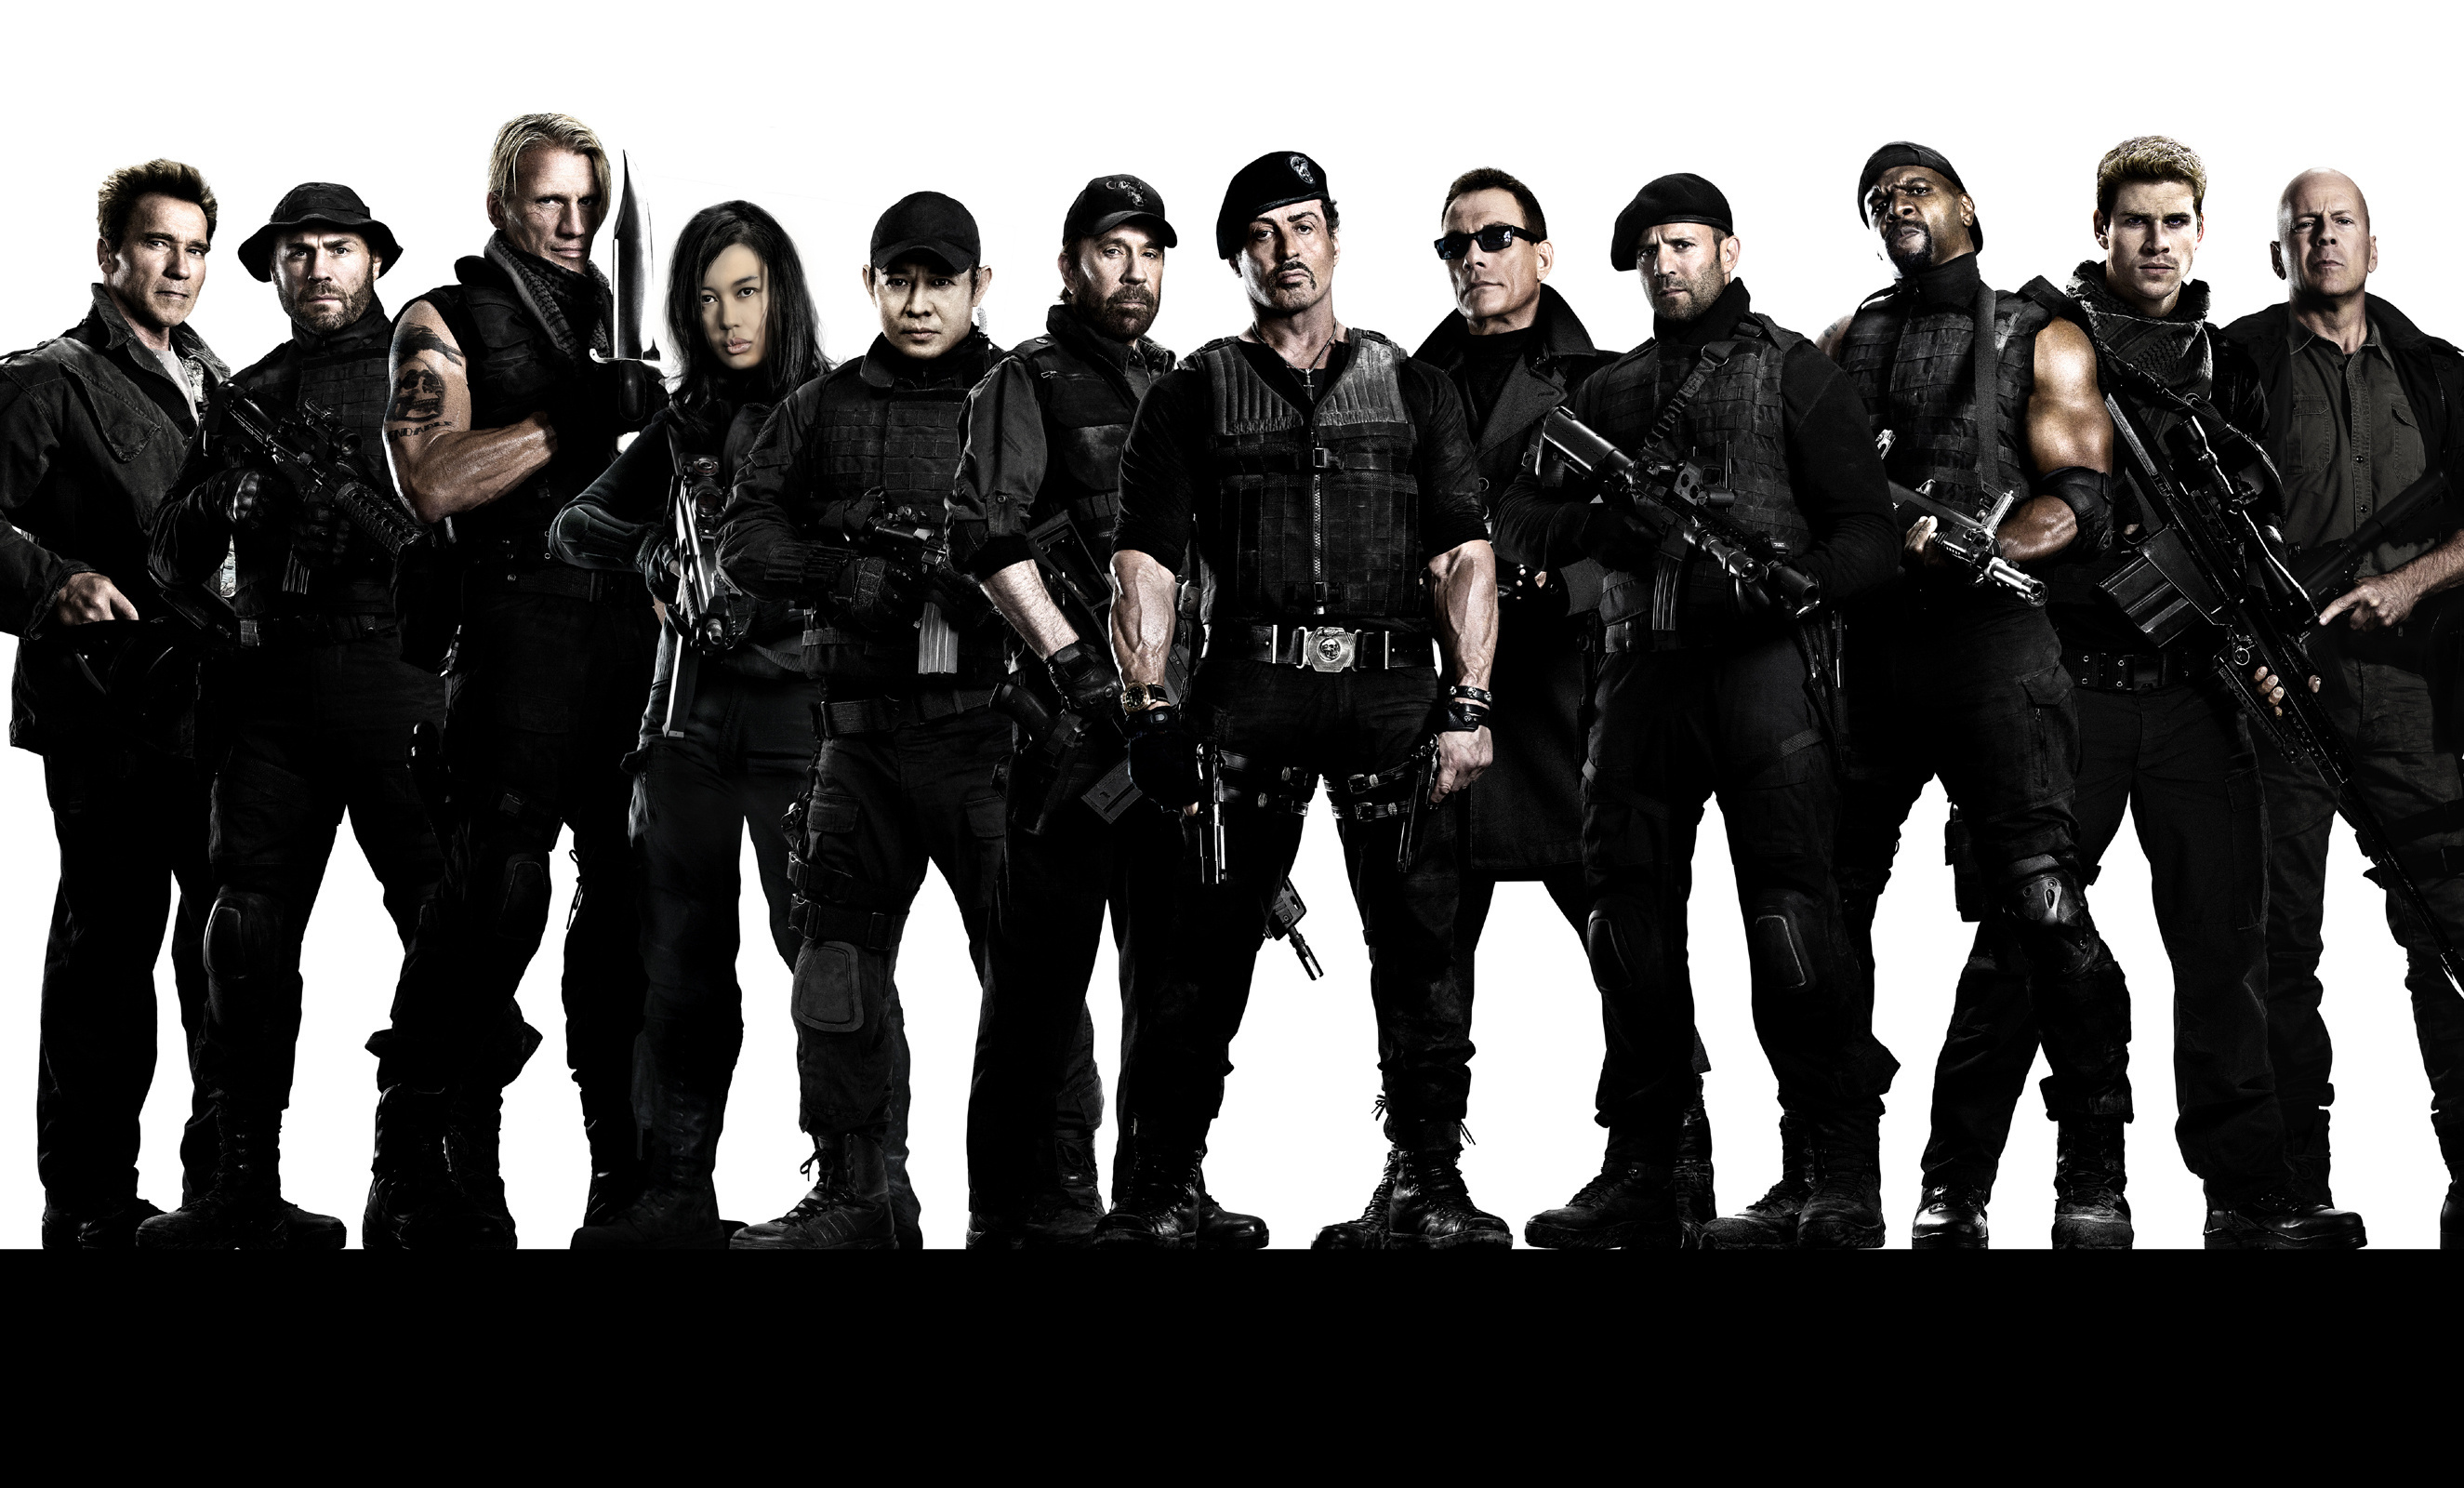 movie, the expendables 2, arnold schwarzenegger, barney ross, billy (the expendables), booker (the expendables), bruce willis, chuck norris, church (the expendables), dolph lundgren, gunnar jensen, hale caesar, jason statham, jean claude van damme, jet li, lee christmas, liam hemsworth, maggie (the expendables), nan yu, randy couture, sylvester stallone, terry crews, toll road, trench (the expendables), vilain (the expendables), yin yang (the expendables), the expendables images